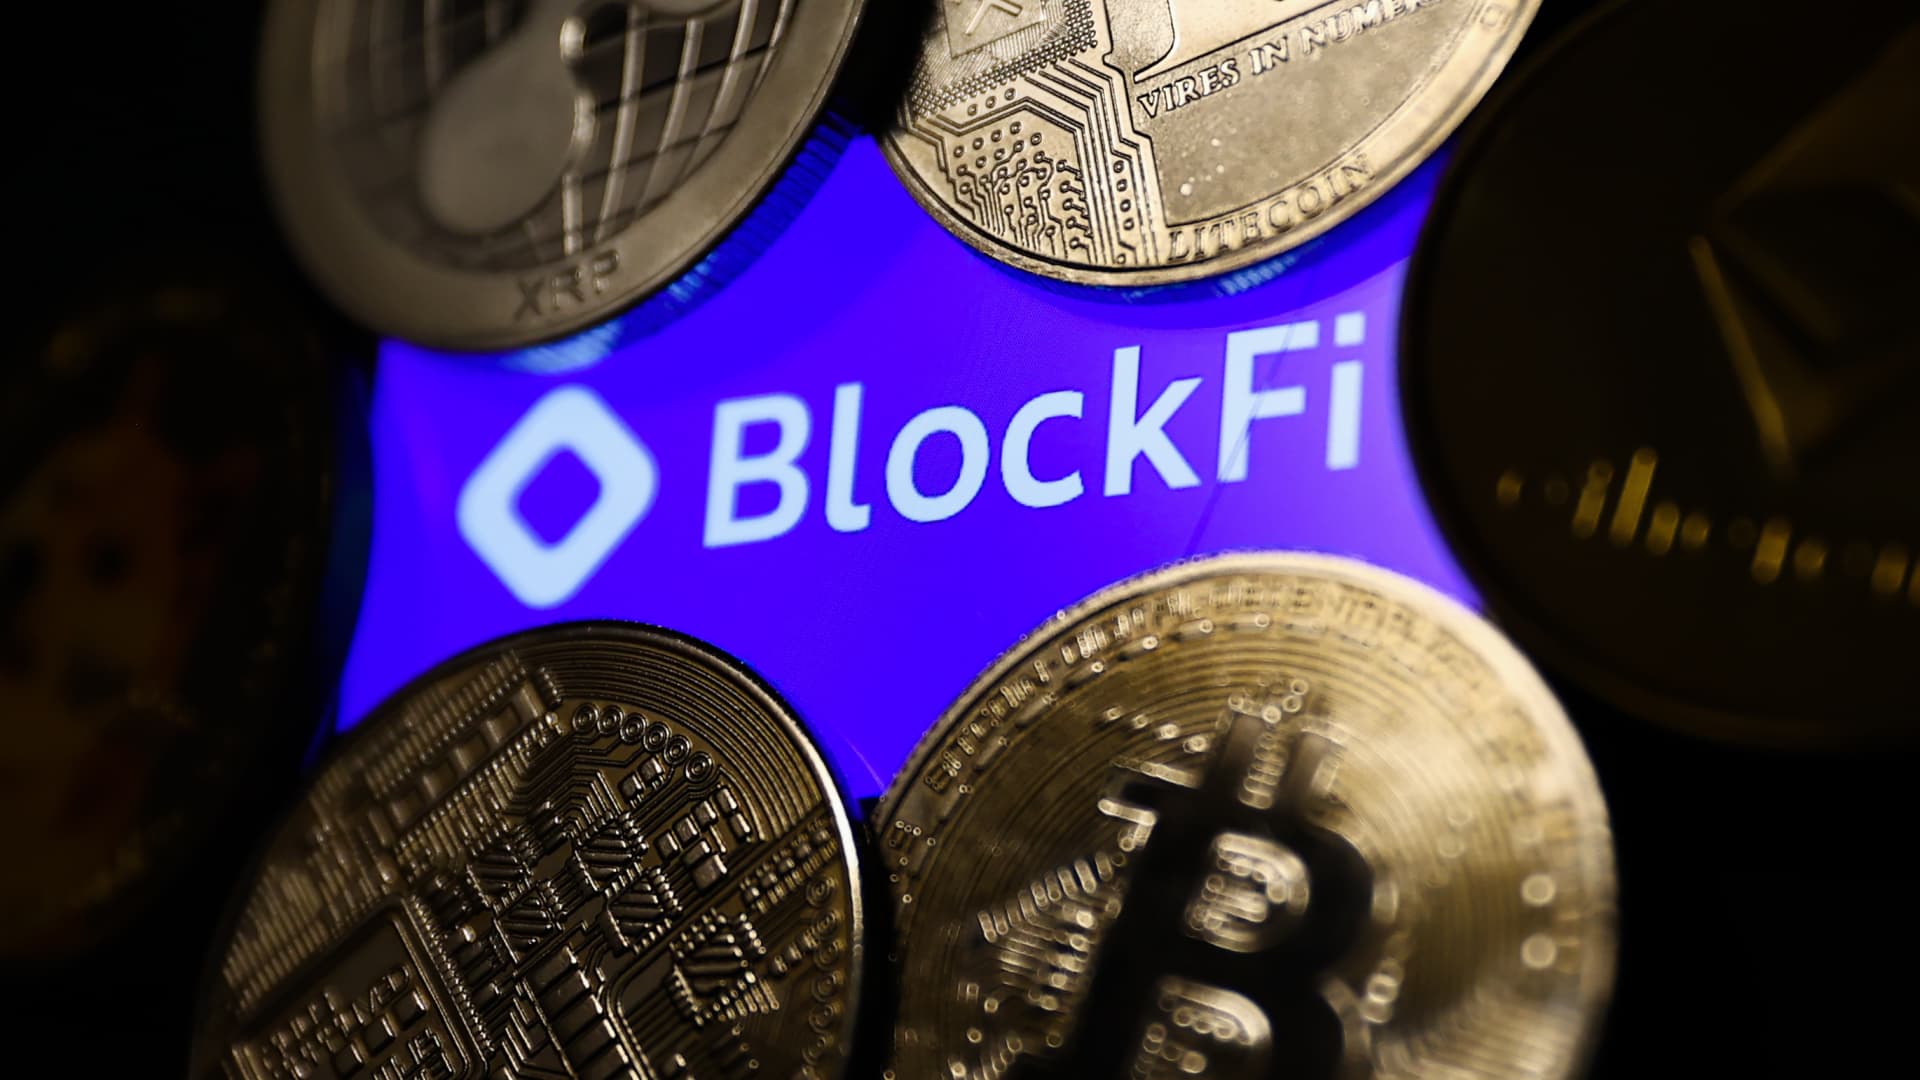 Crypto firm BlockFi files for bankruptcy as FTX fallout spreads